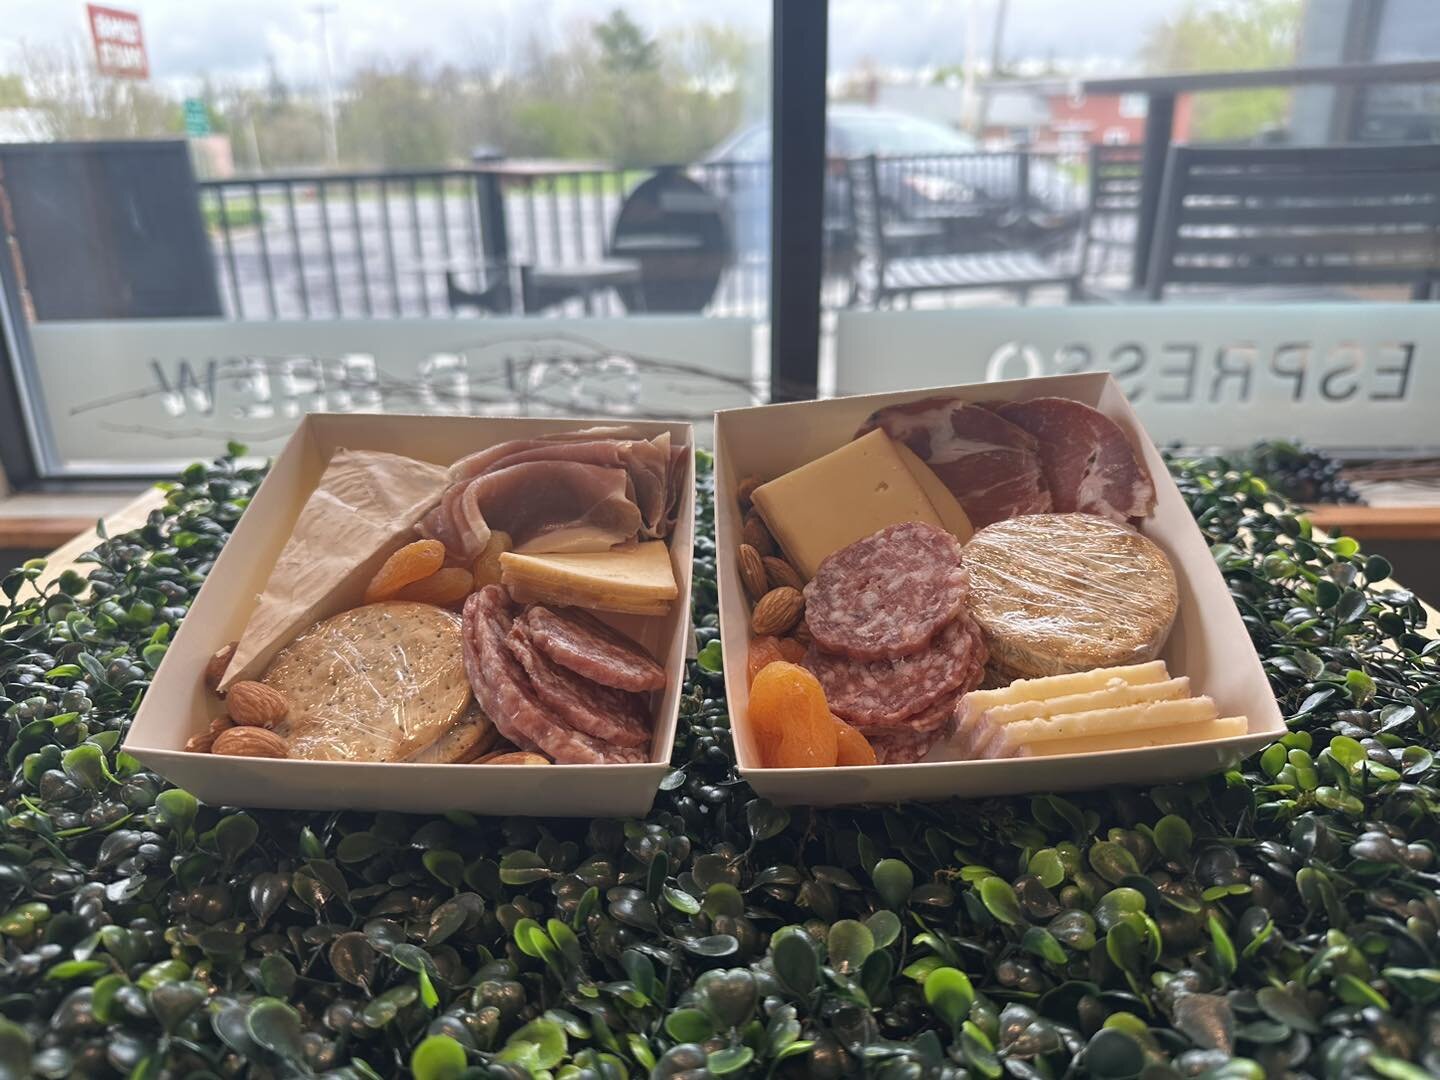 Are you hungry for something other than fast food for lunch? Would you like something that you can quickly grab and take on the go?

We are now featuring Adult Lunchables! Stop in and grab one of our premade boxes along with your afternoon coffee. Se